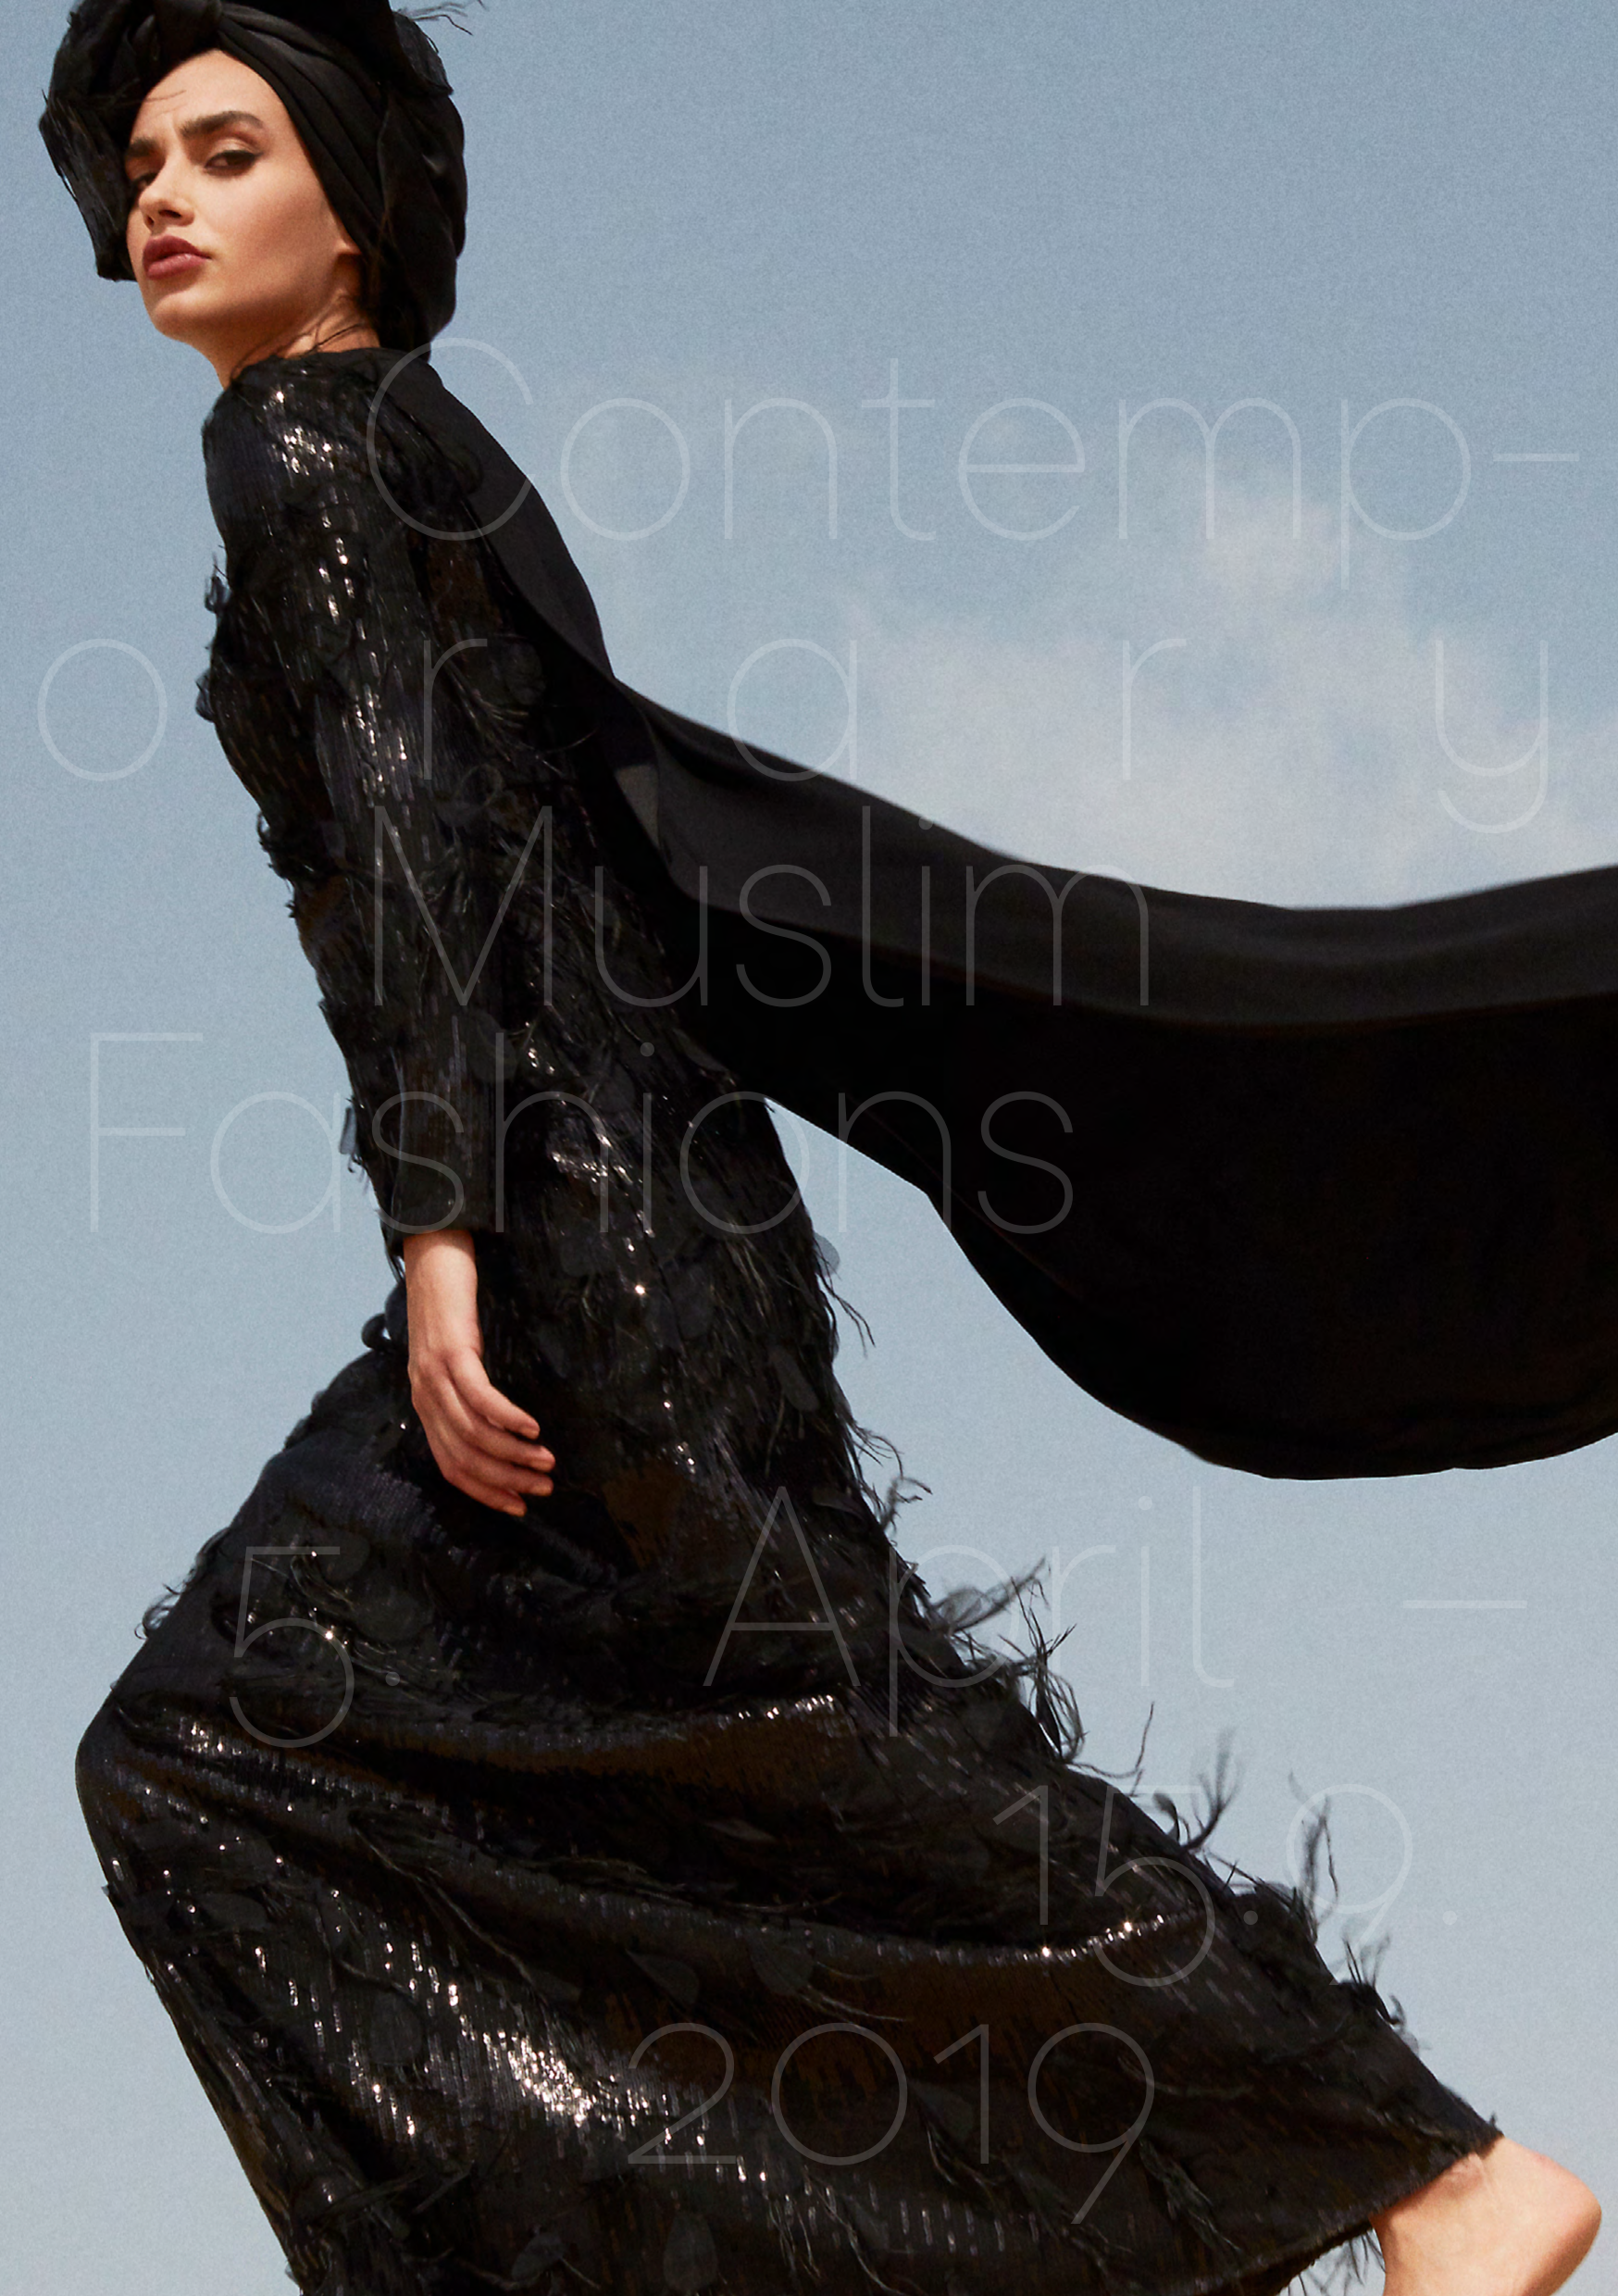 Exhibition at the Museum Angewandte Kunst in Frankfurt, Germany: Contemporary Muslim Fashions